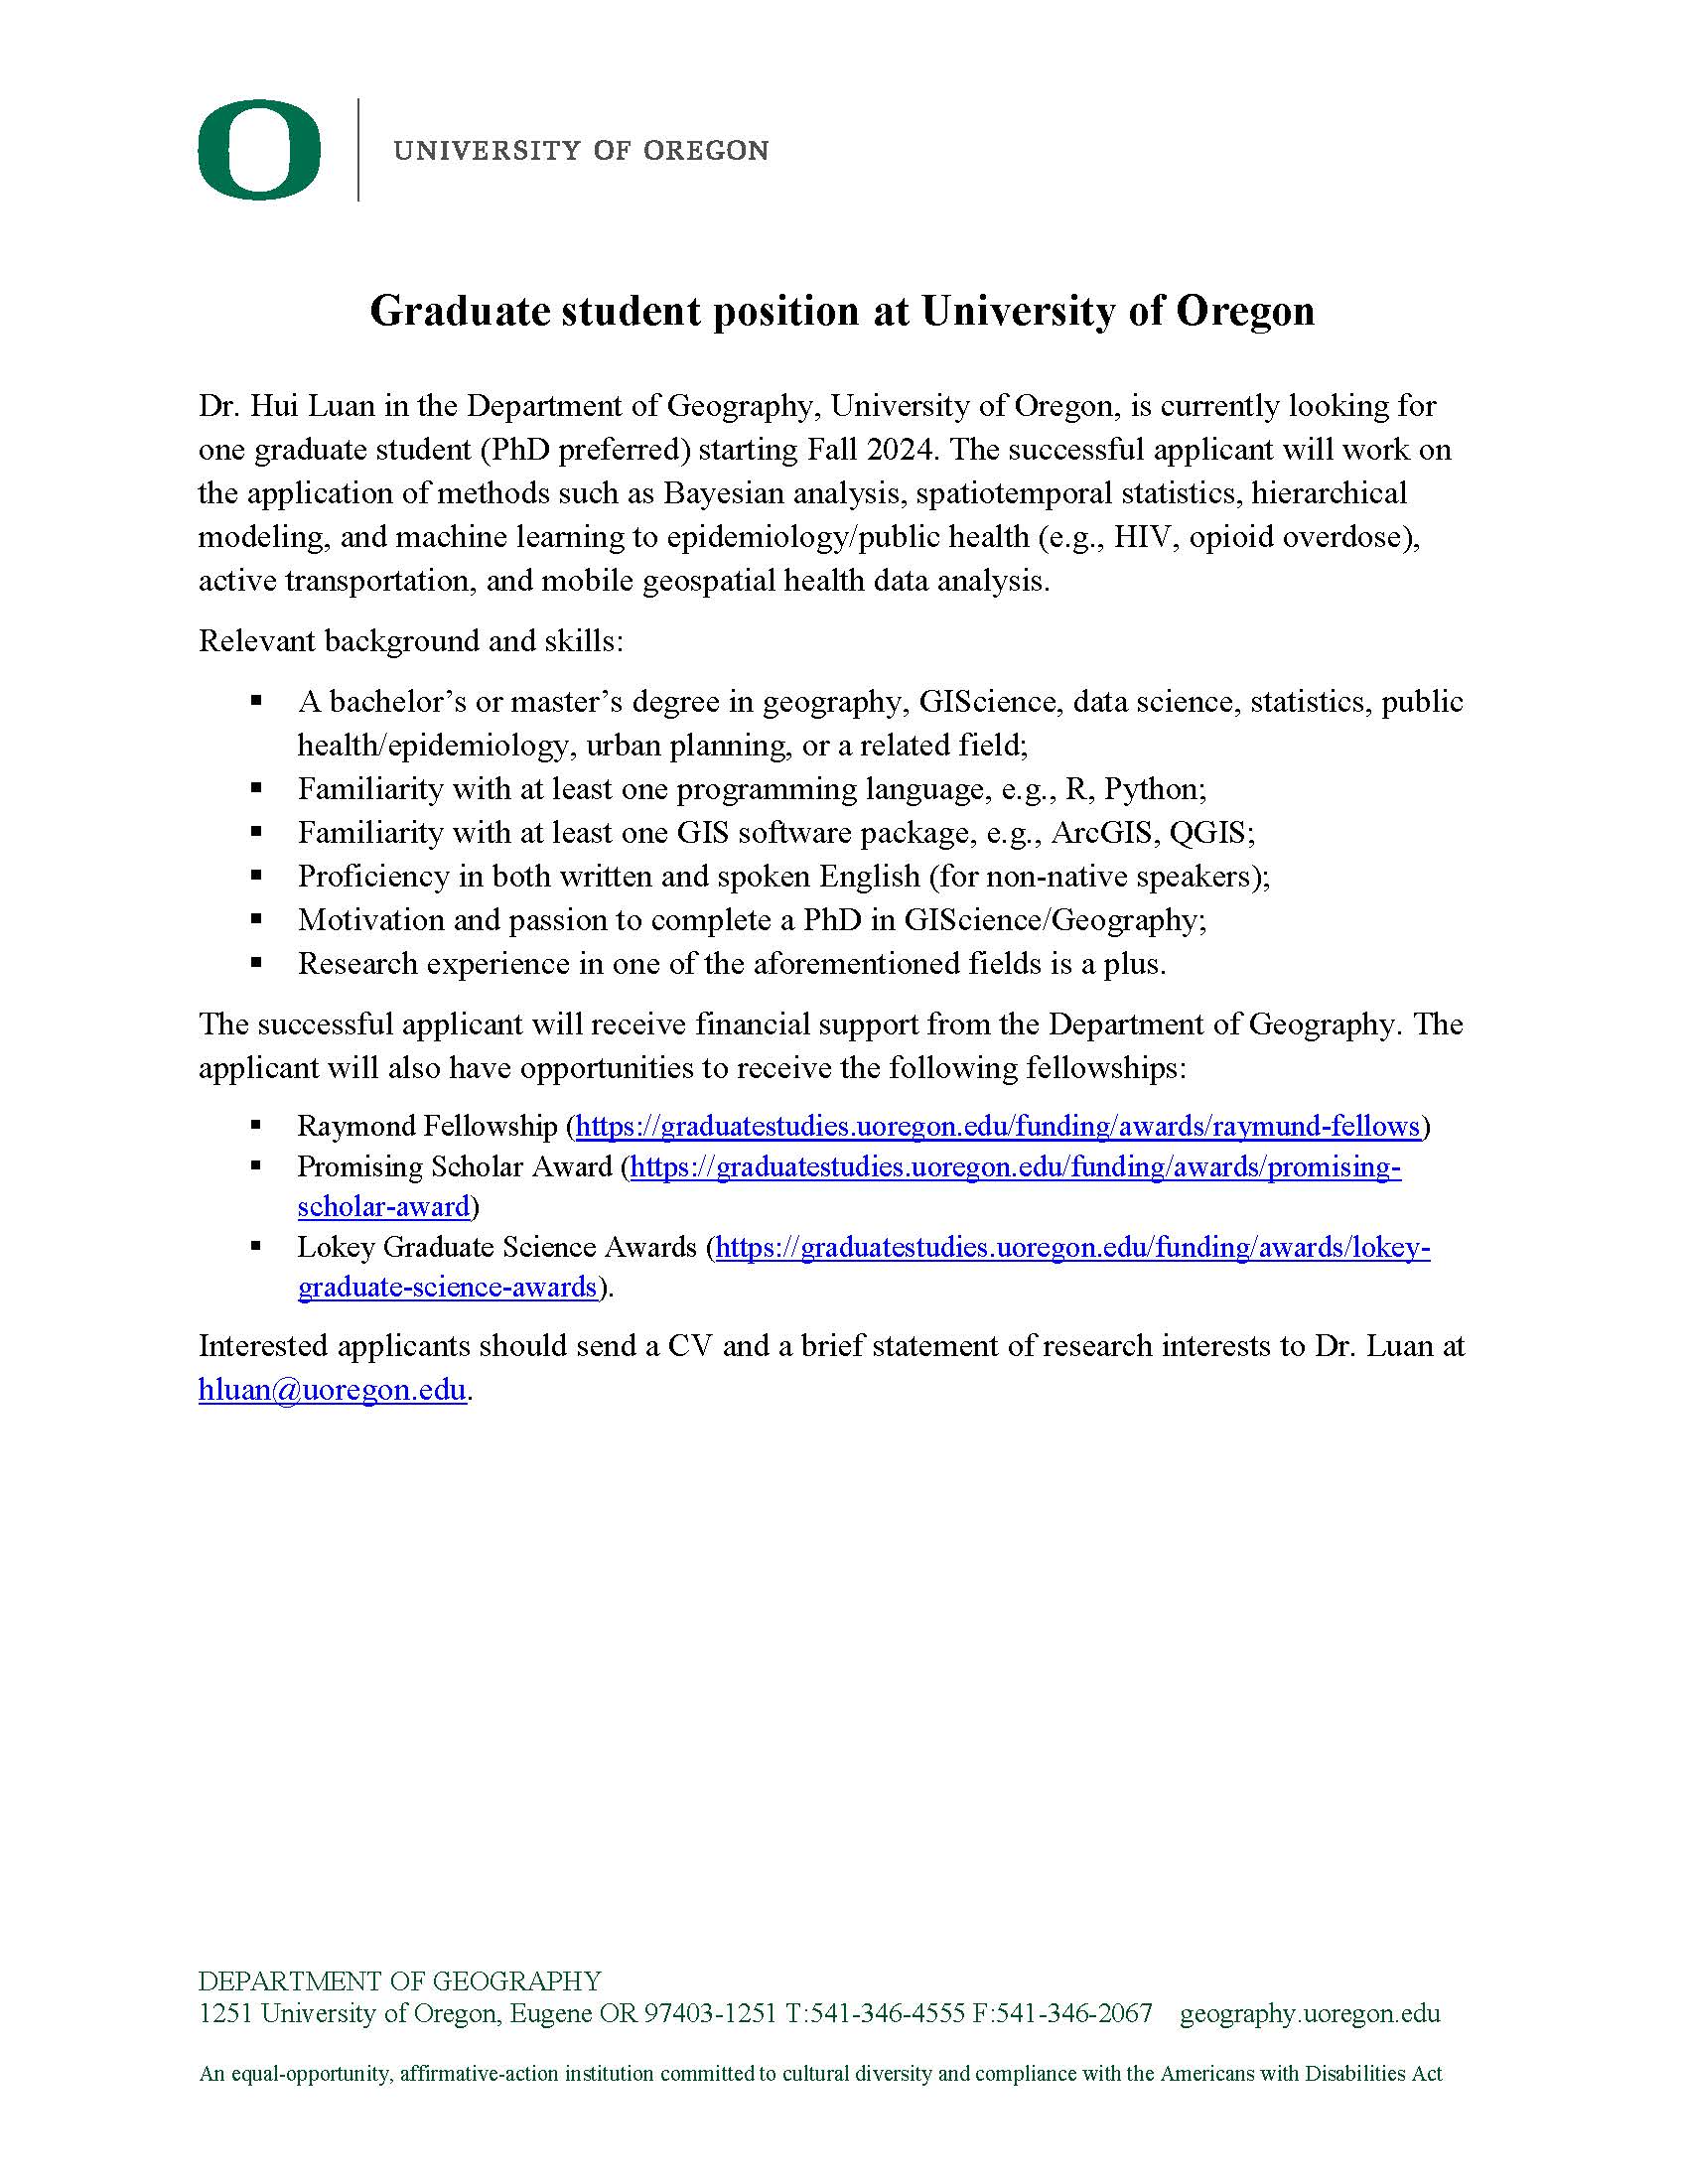 Graduate student position for Fall 2024 Hui LuanUO